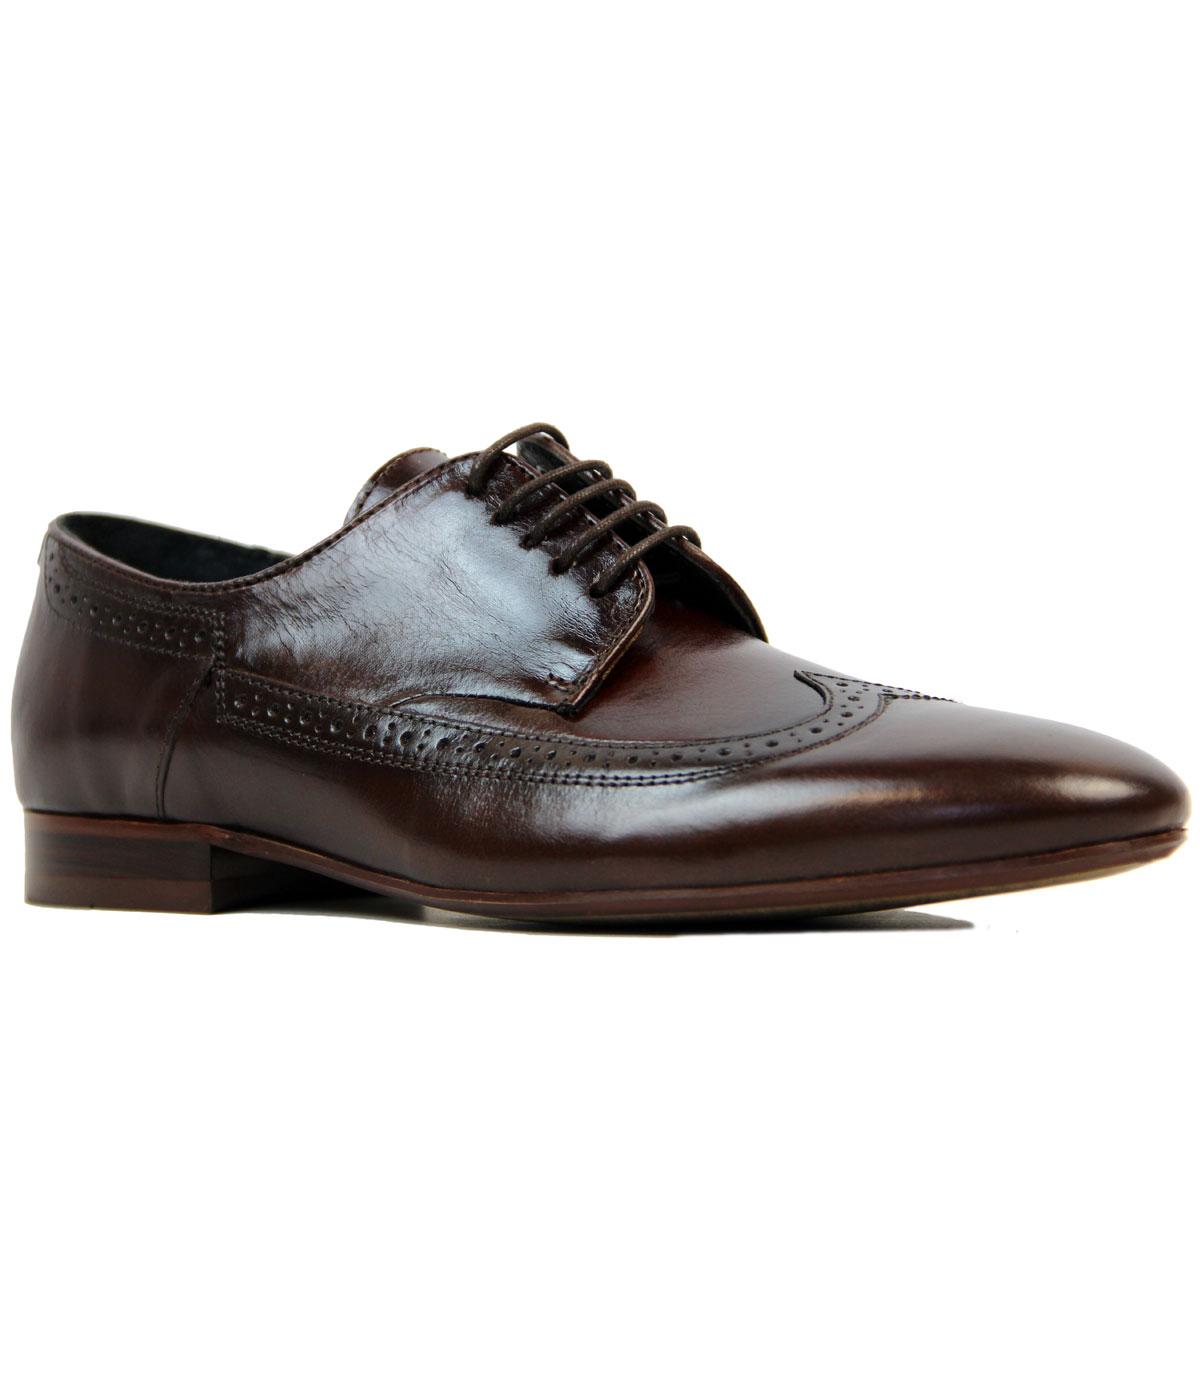 Olave H BY HUDSON 60s Mod Wing Tip Derby Brogues 